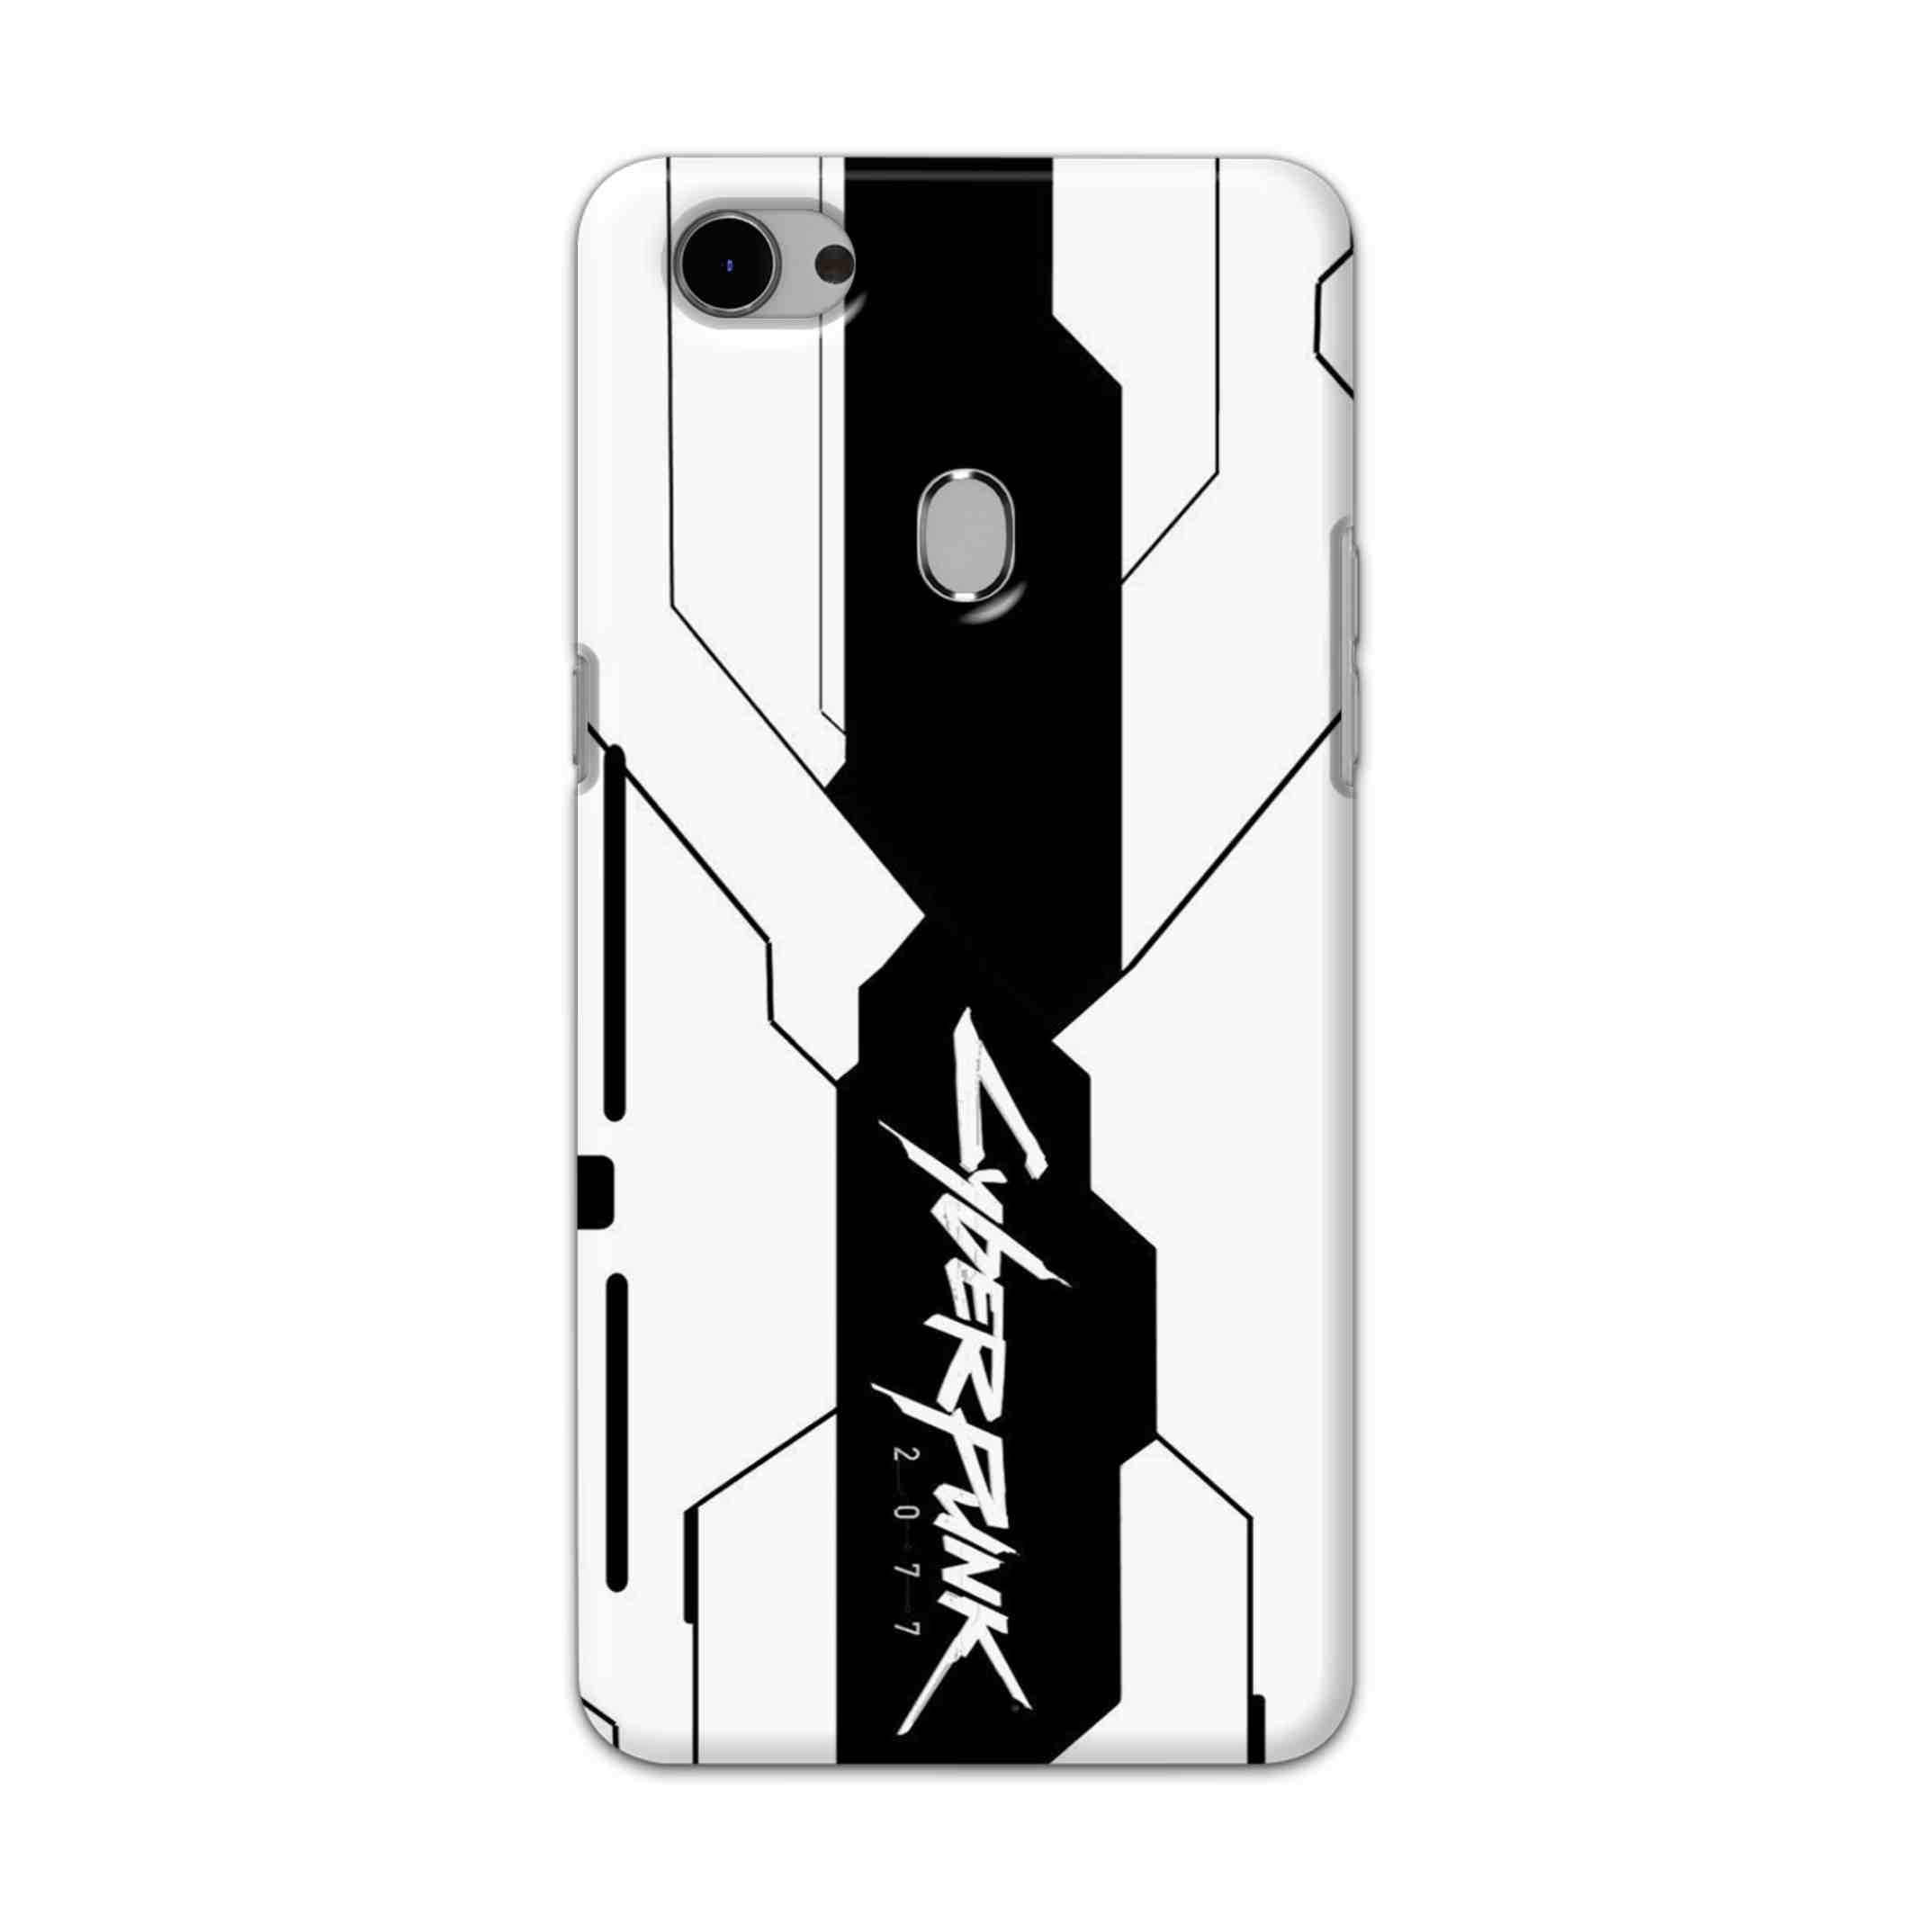 Buy Cyberpunk 2077 Hard Back Mobile Phone Case Cover For Oppo F7 Online